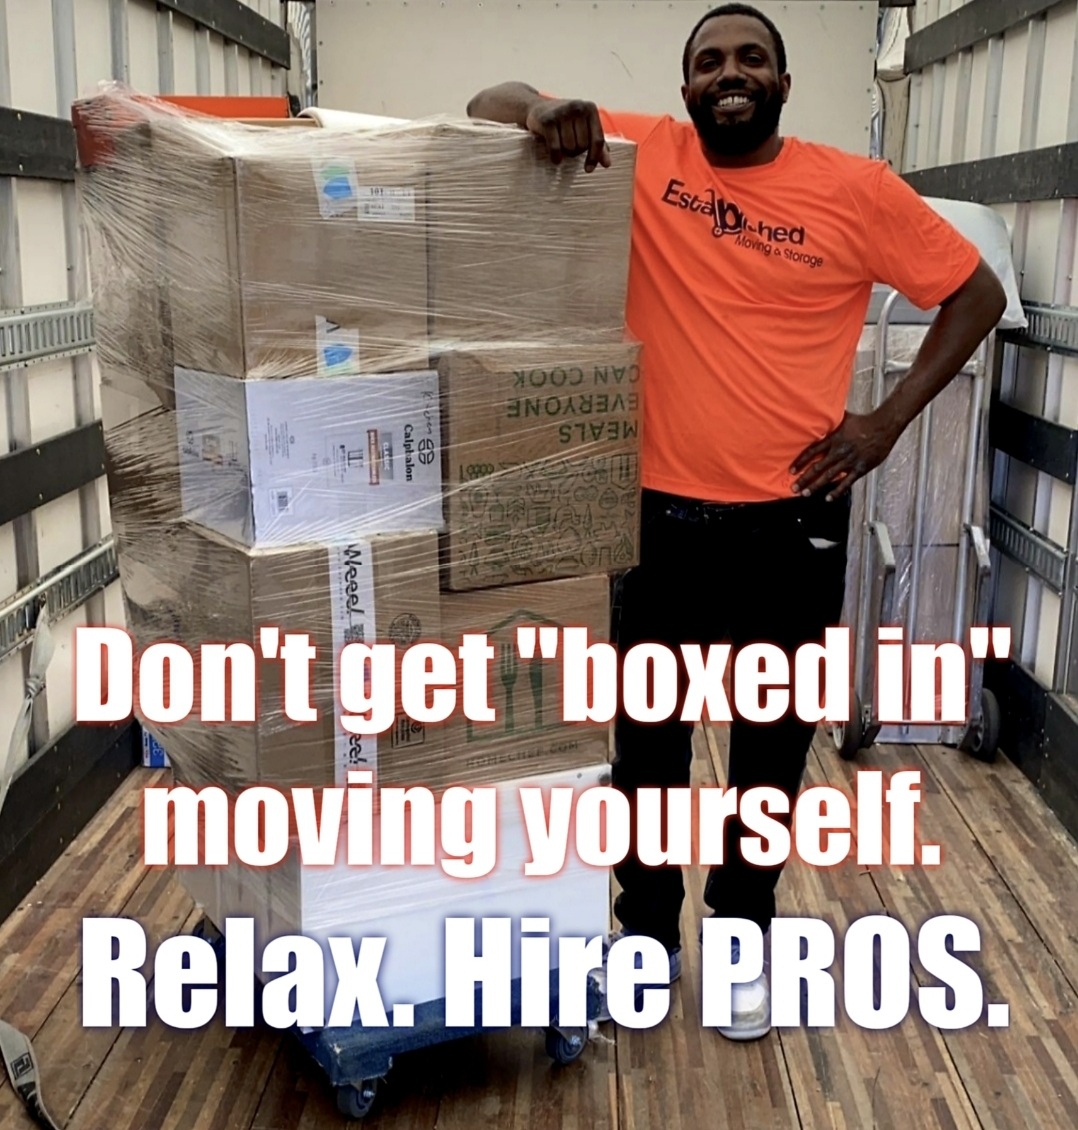 a man stands with boxes, with text saying, "relax. hire pros."